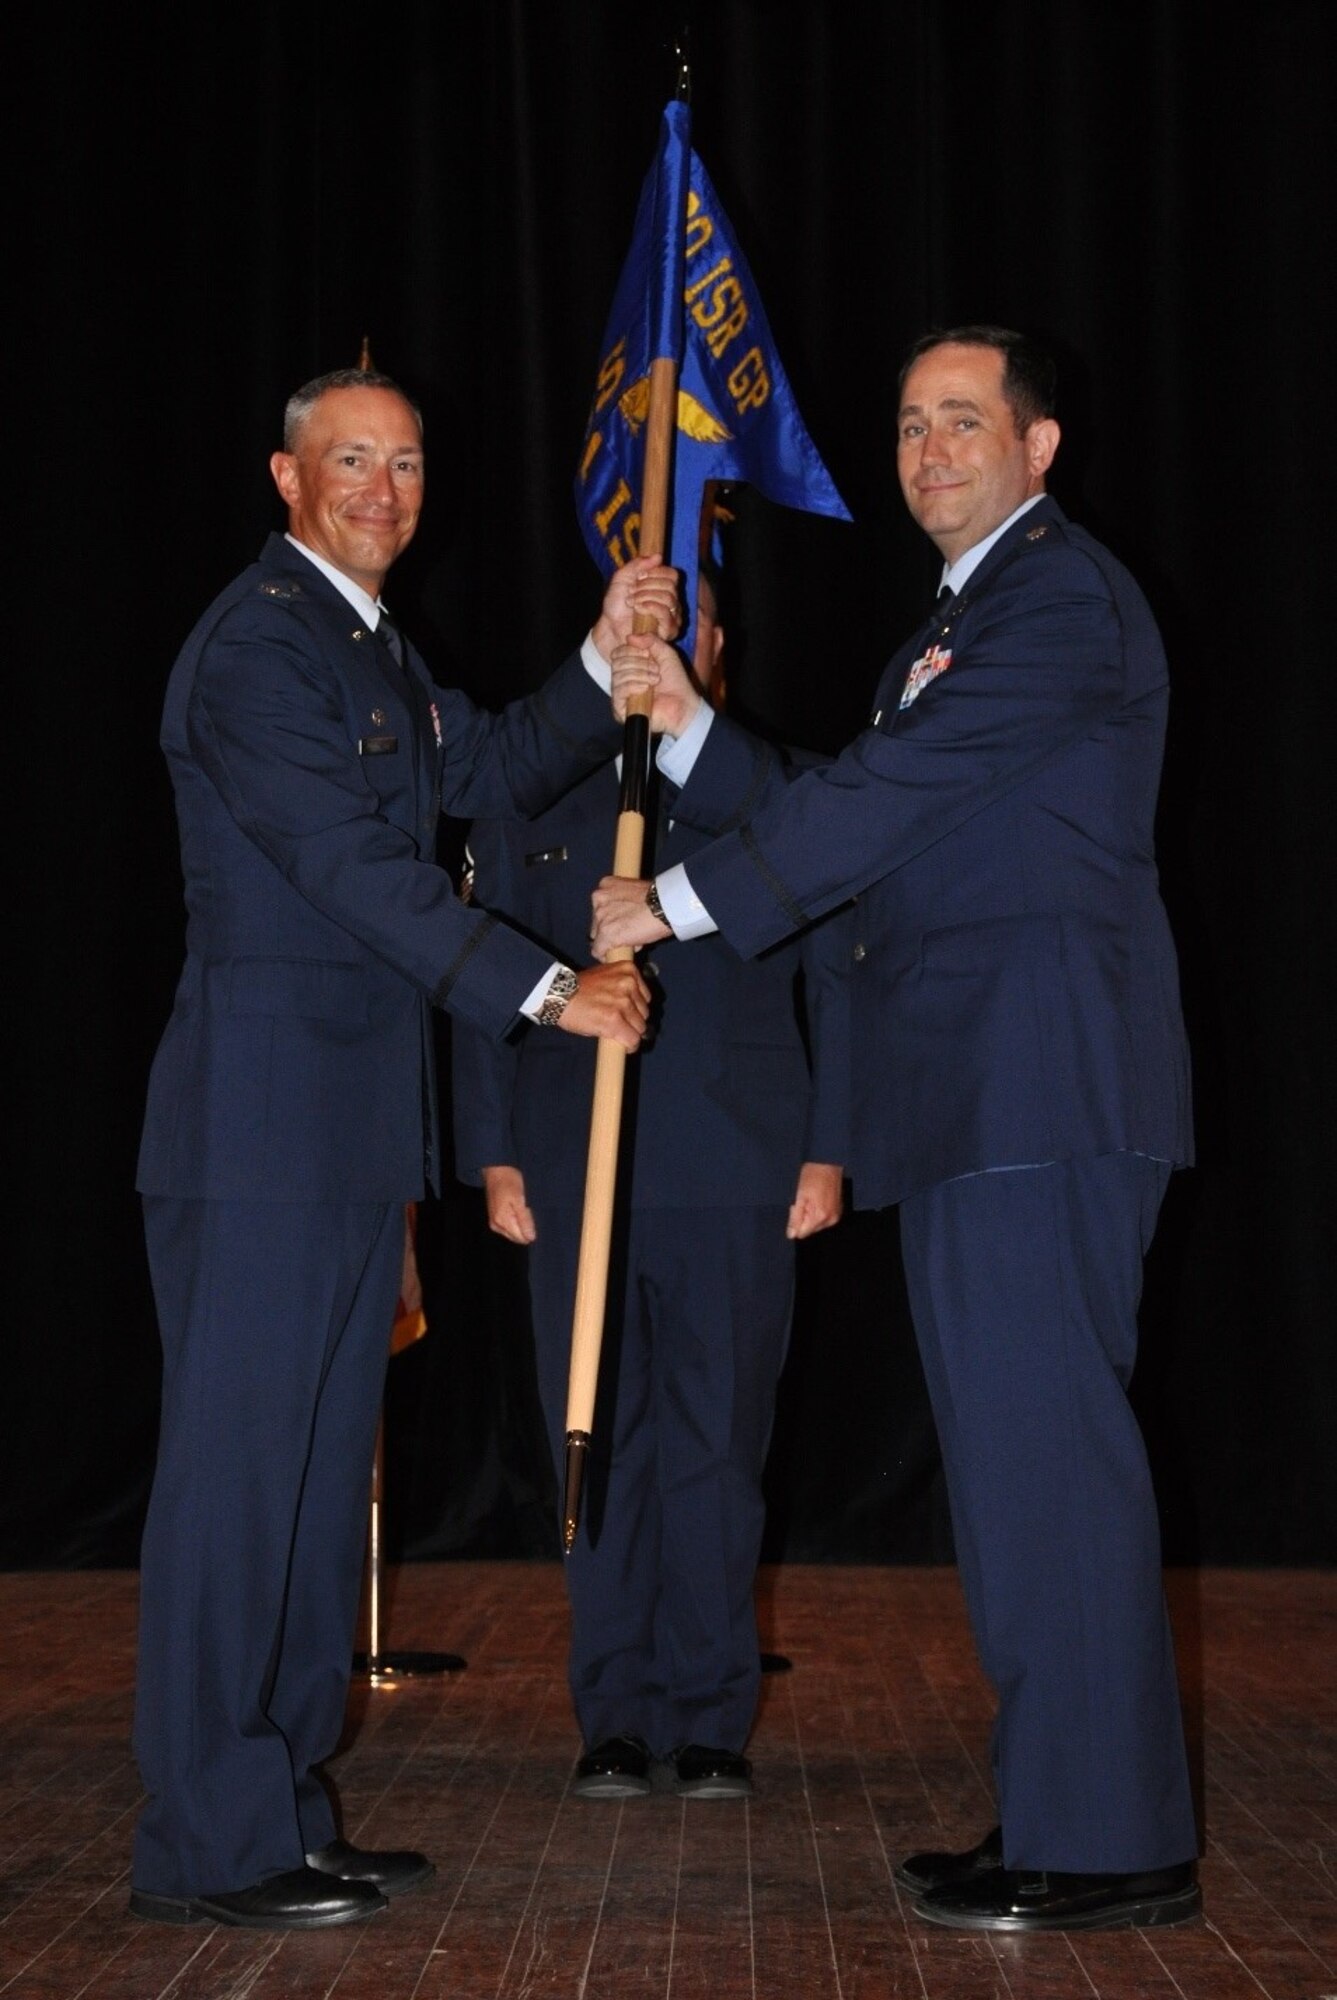 U.S. Air Force Col. Abraham Jackson, 480th Intelligence, Surveillance and Reconnaissance Group commander, presents the guidon to Lt. Col. James Fagan, 451st Intelligence Squadron, during an assumption of command ceremony in Signal Theater at Fort Gordon, Georgia, July 11, 2019. The 451st IS was stood up in order to conduct and execute Air Force and national analysis and reporting capabilities using tactical and national resources to provide intelligence products for U.S. Central Command, U.S. European Command and U.S. Southern Command operations, plans and forces, and the execution of Air Force national and tactical integration operations. (Courtesy photo)